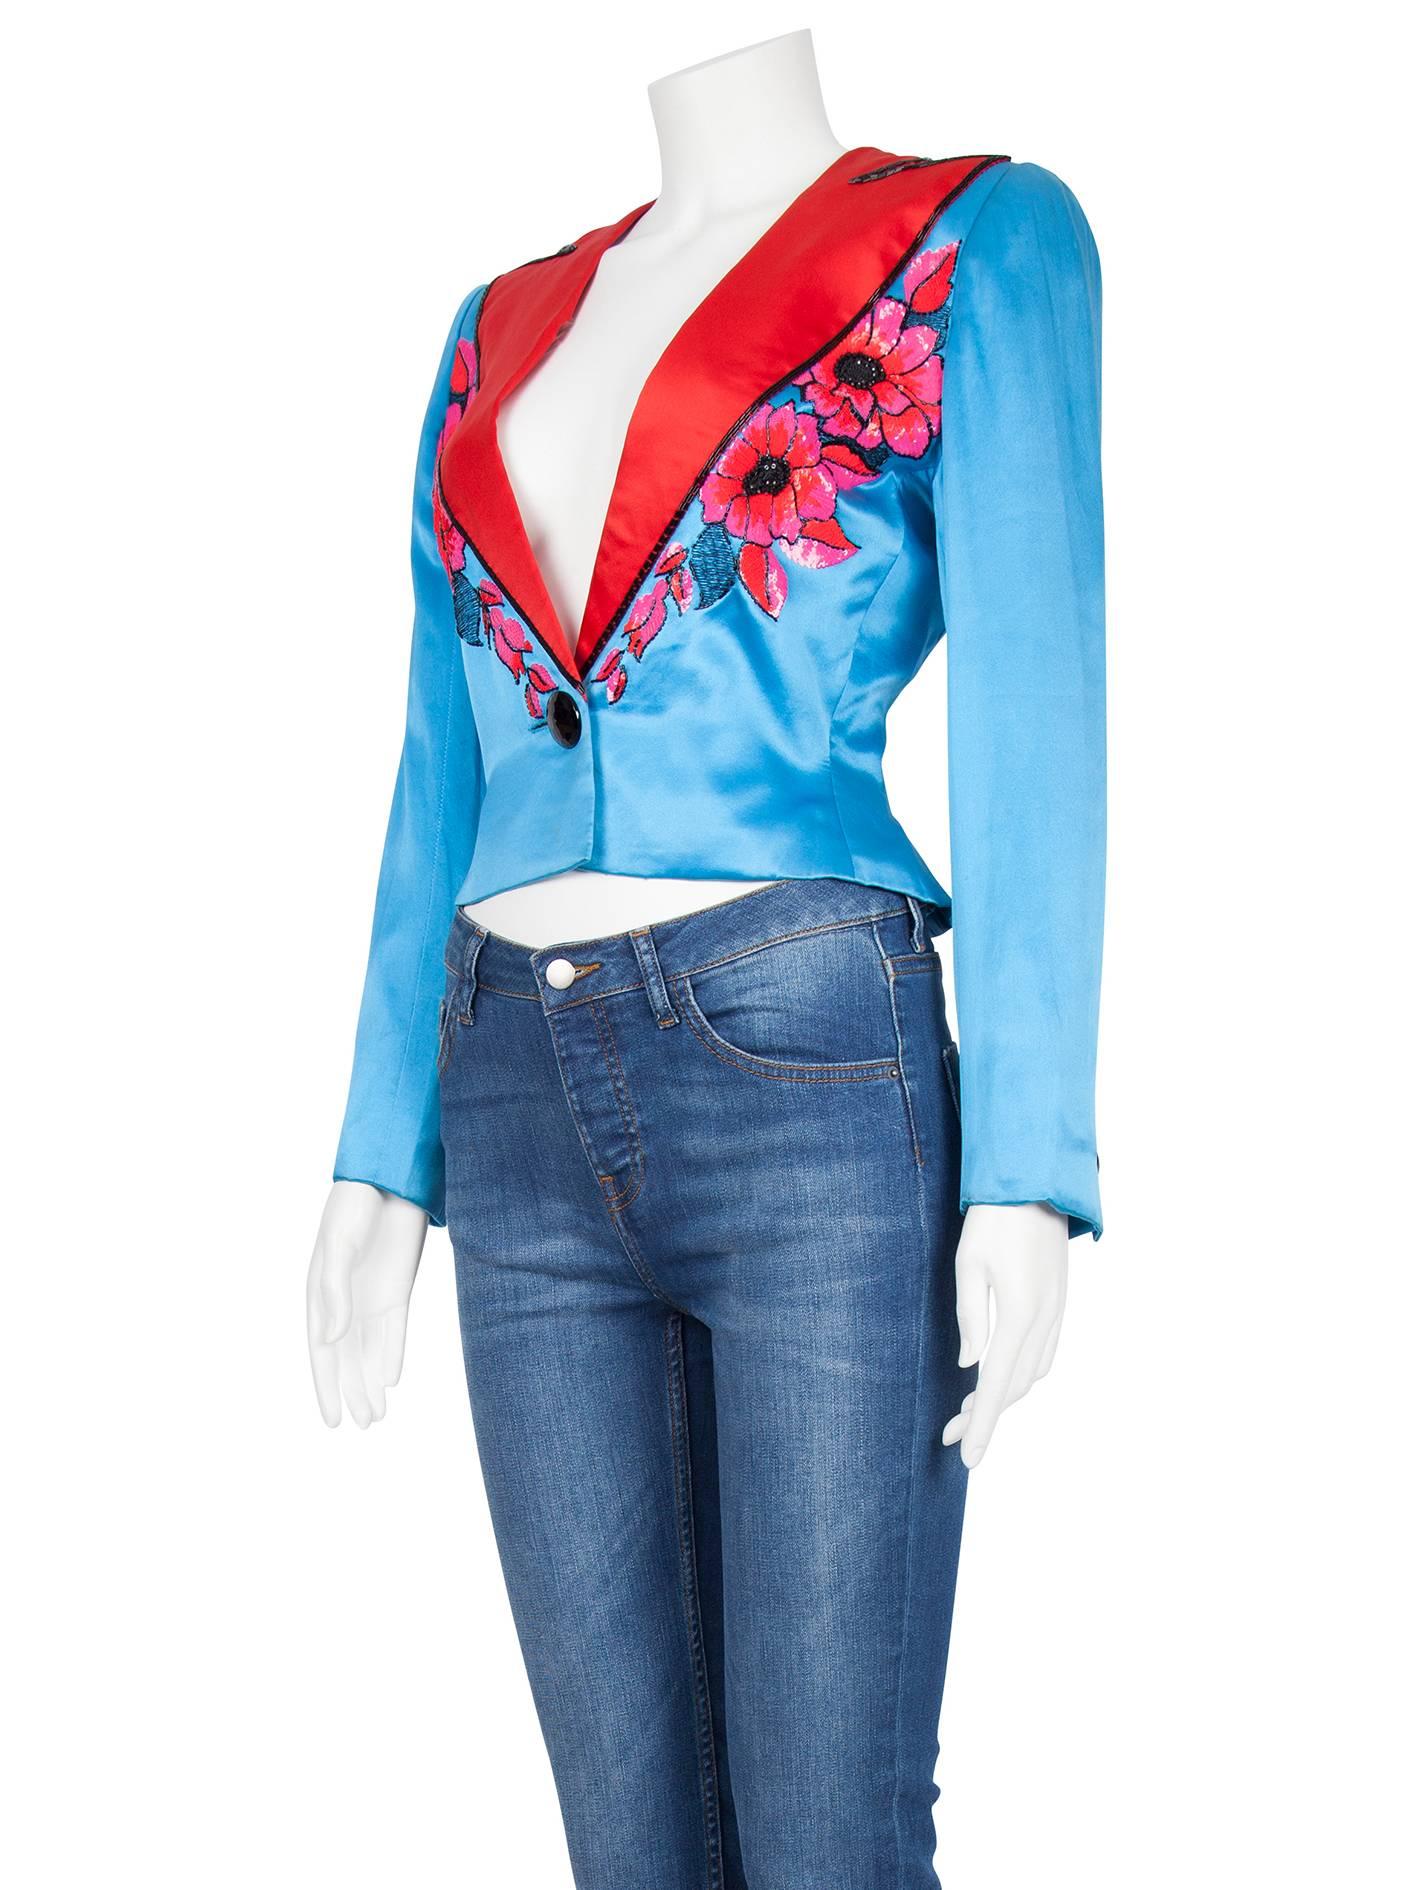 S/S 1983 Dior Couture Turquoise Satin Jacket Pink & Red Sequinned Embroidery In Excellent Condition For Sale In London, GB